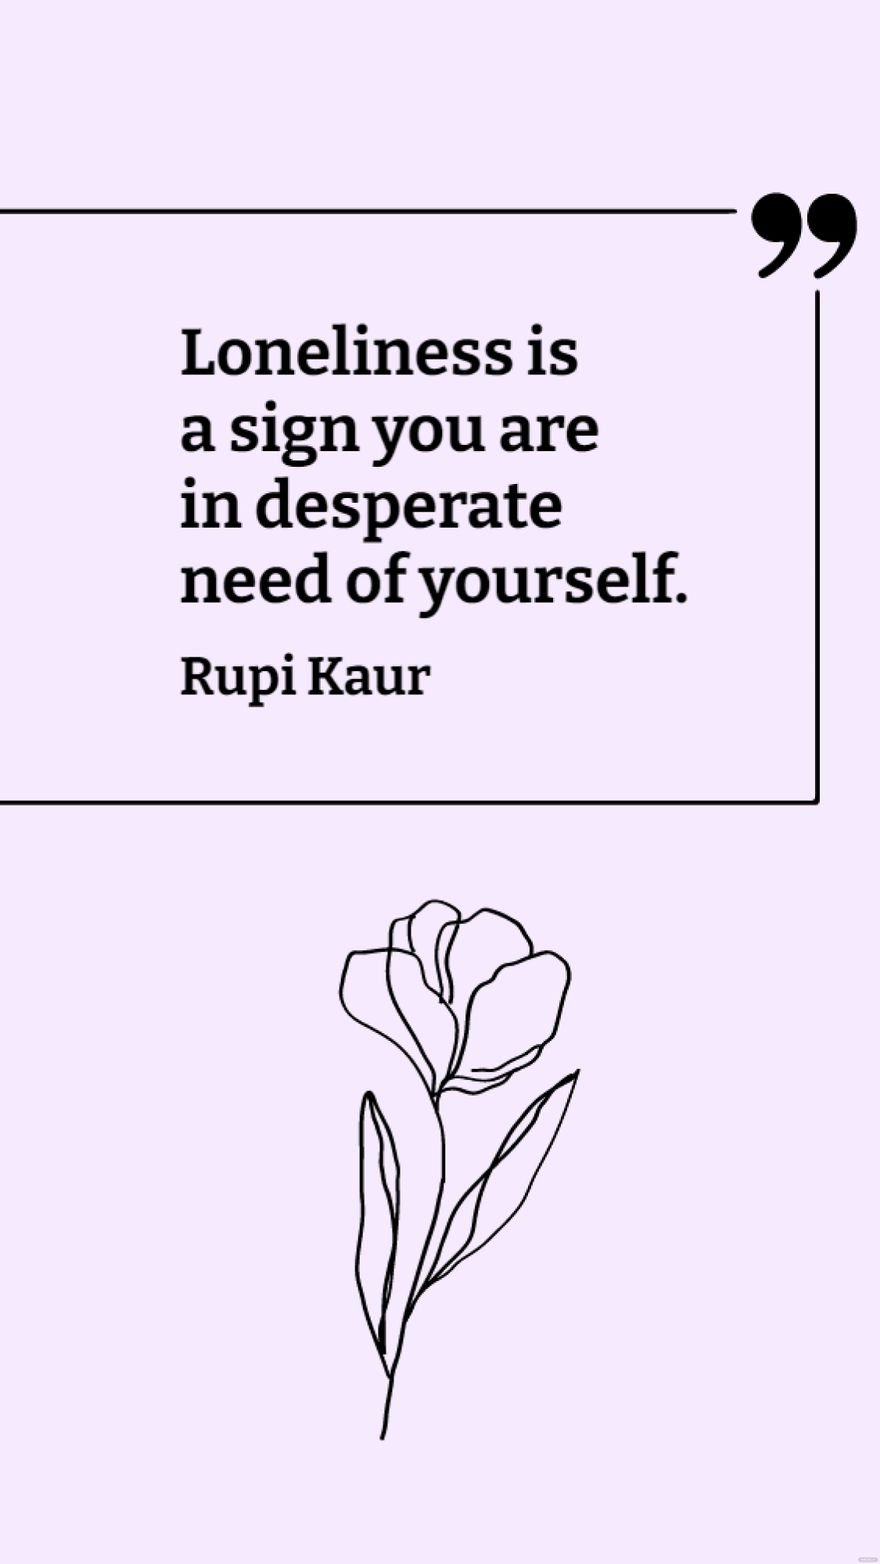 Rupi Kaur - Loneliness is a sign you are in desperate need of yourself. in JPG